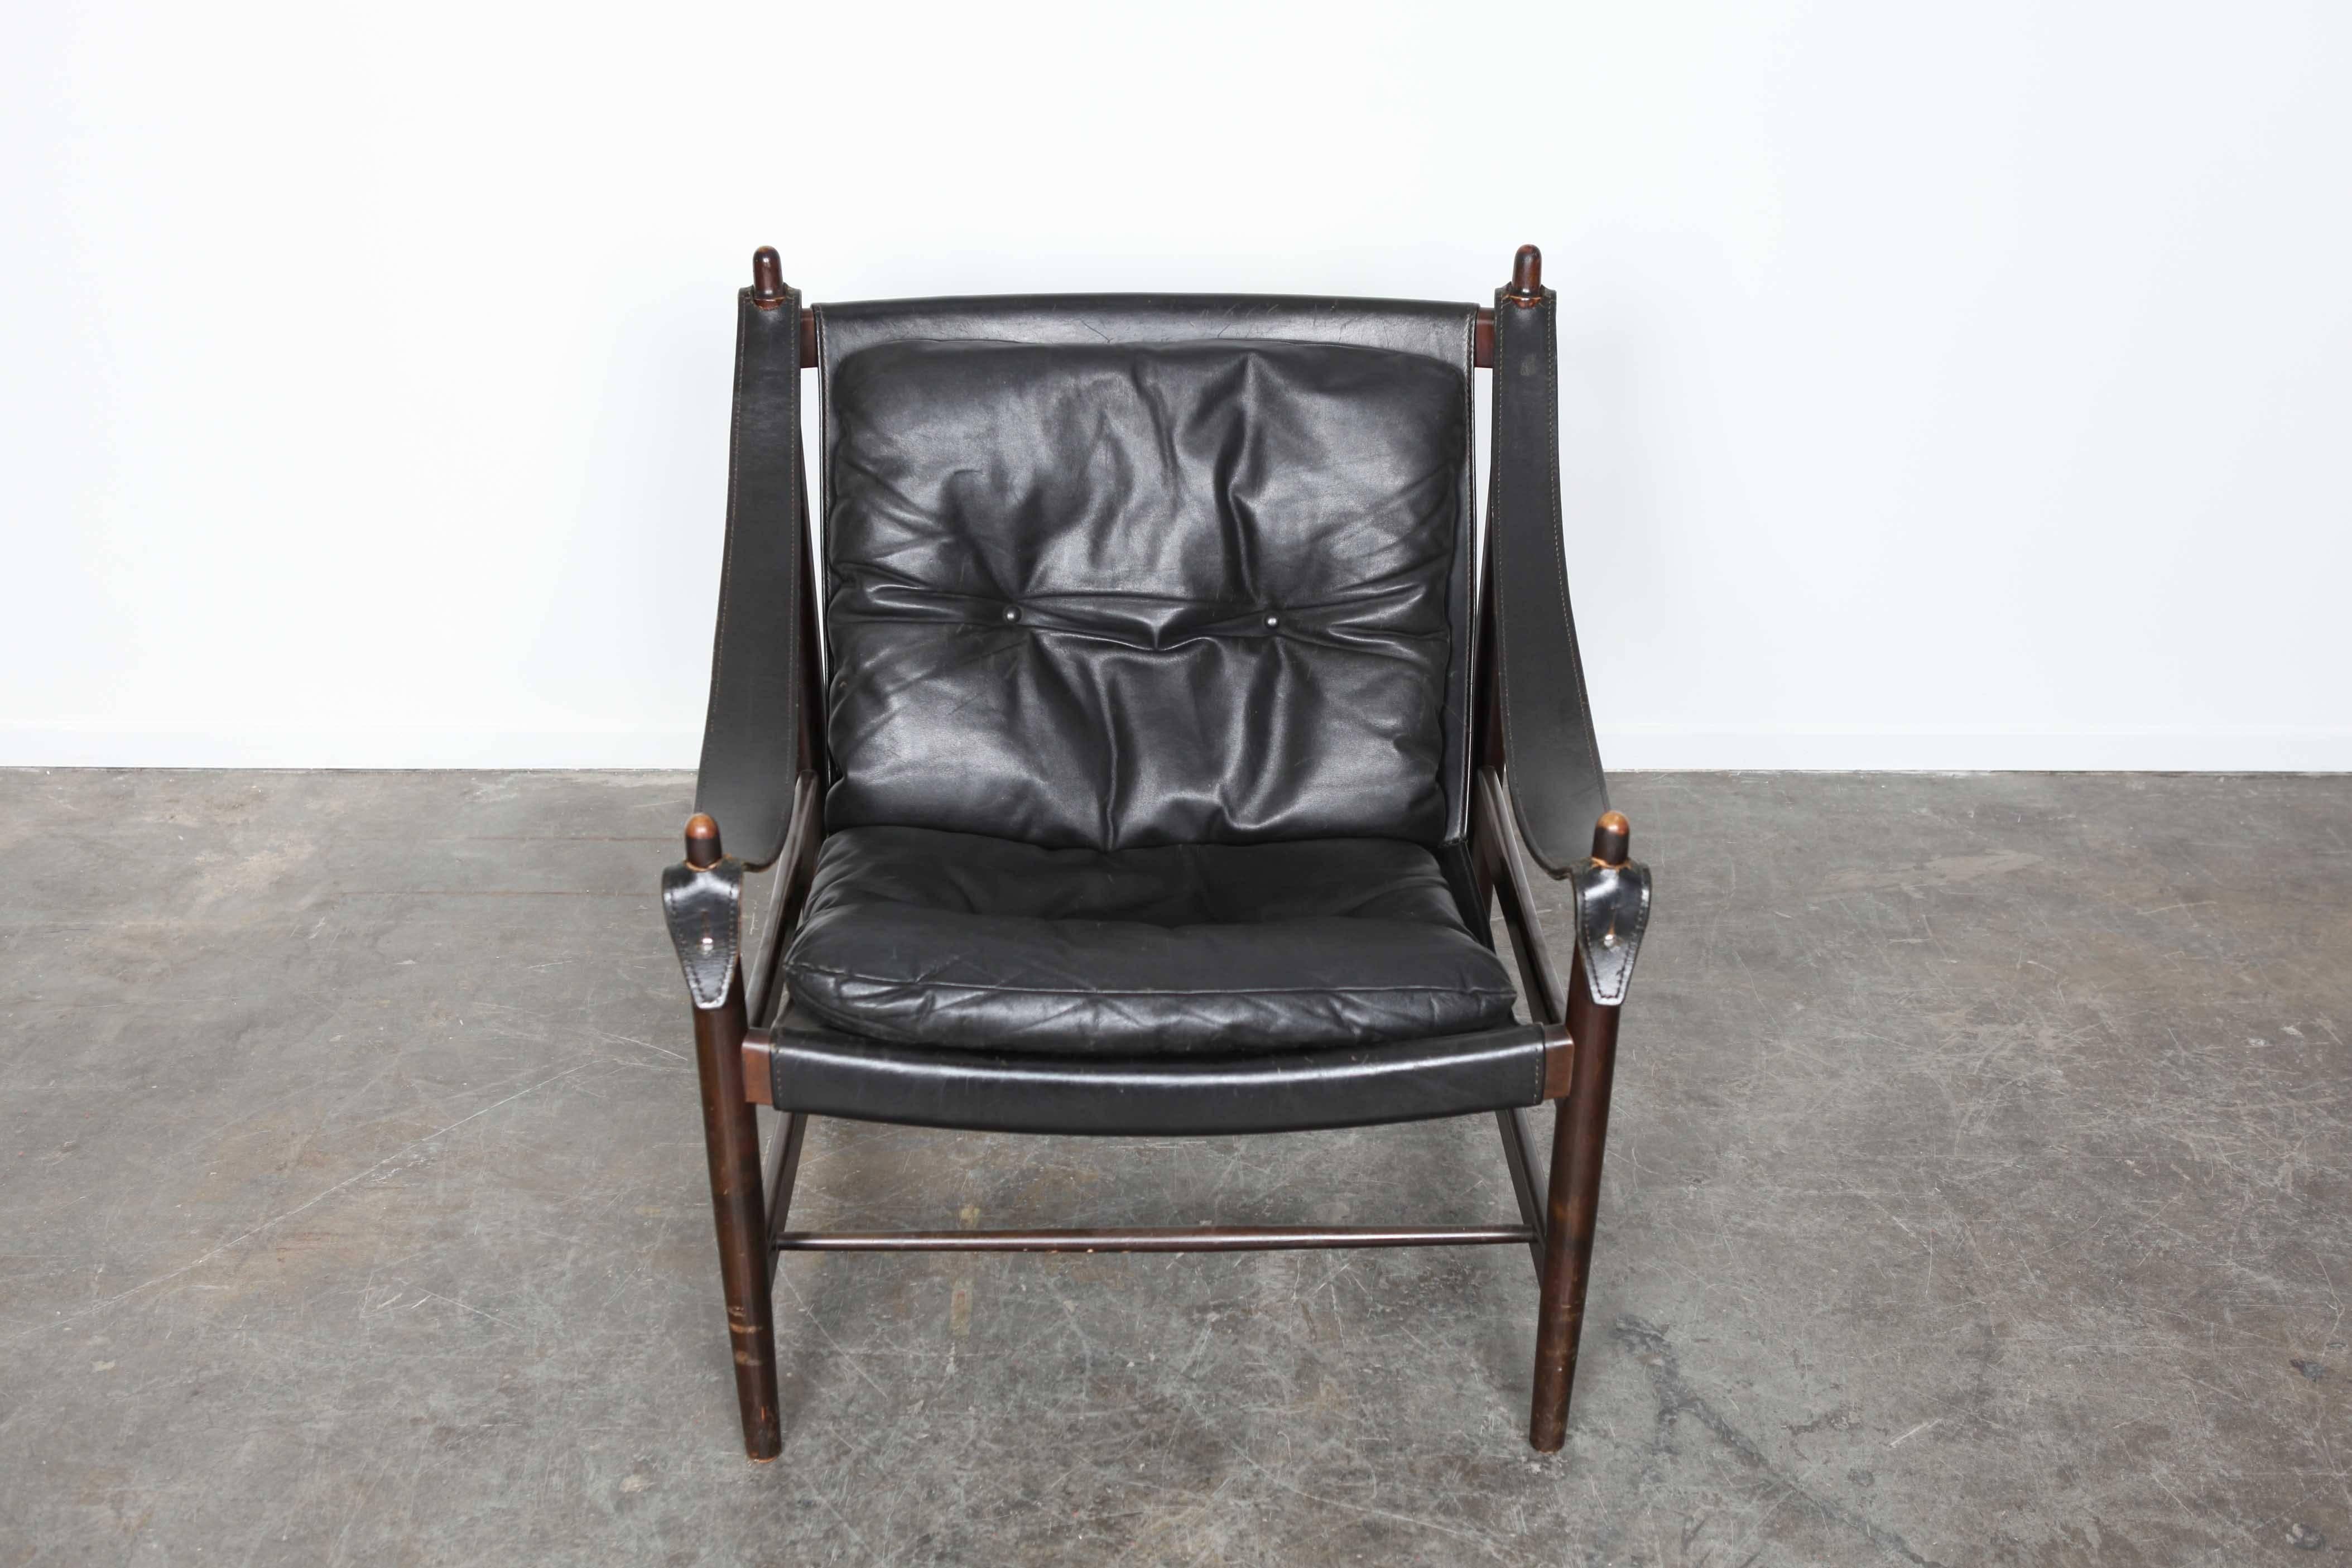 Black leather safari chair with leather armrests. Wood frame with all original leather.